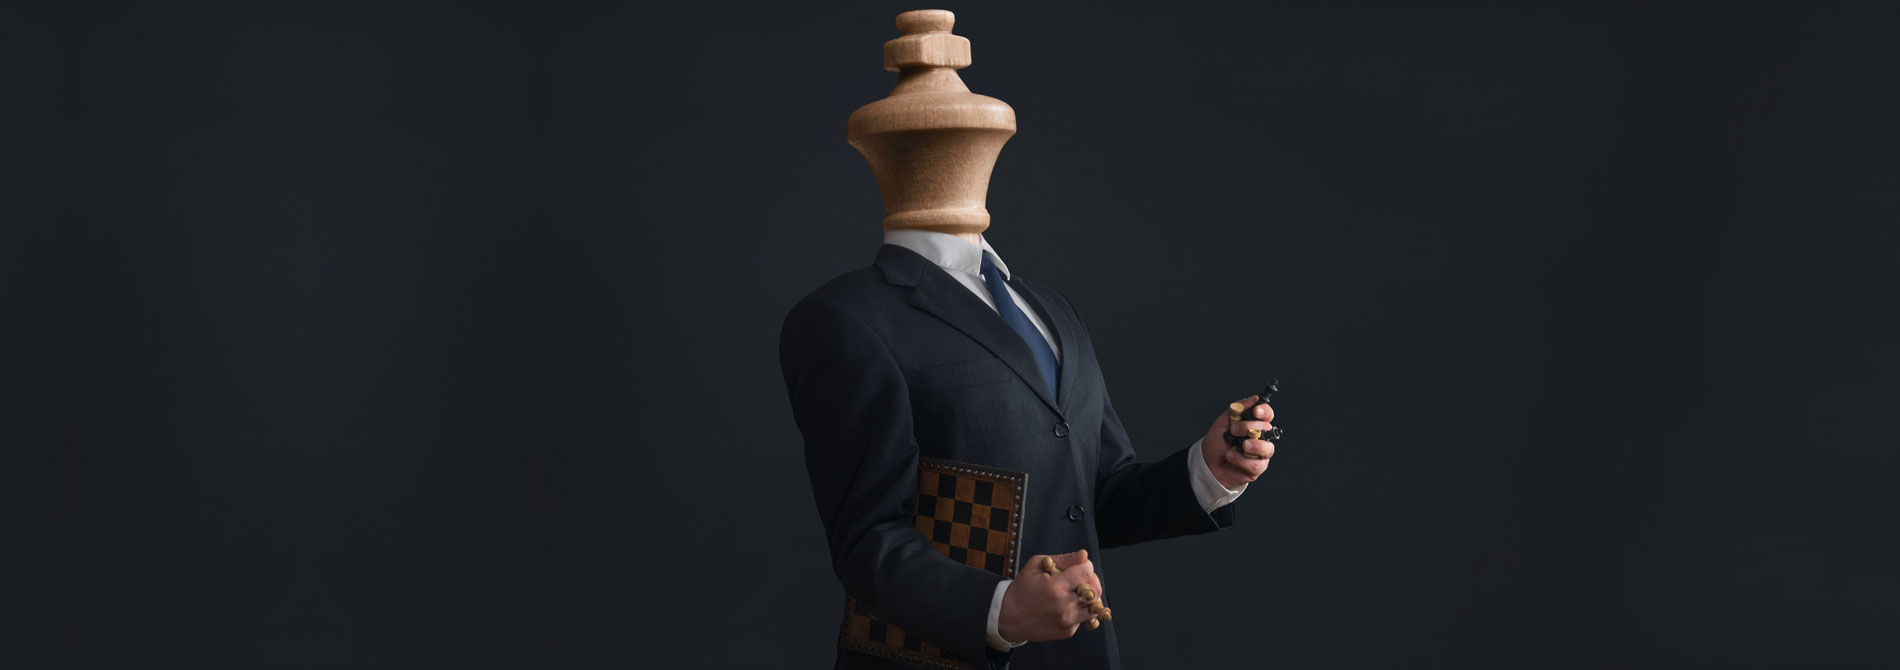 Chess piece dressed up as business man